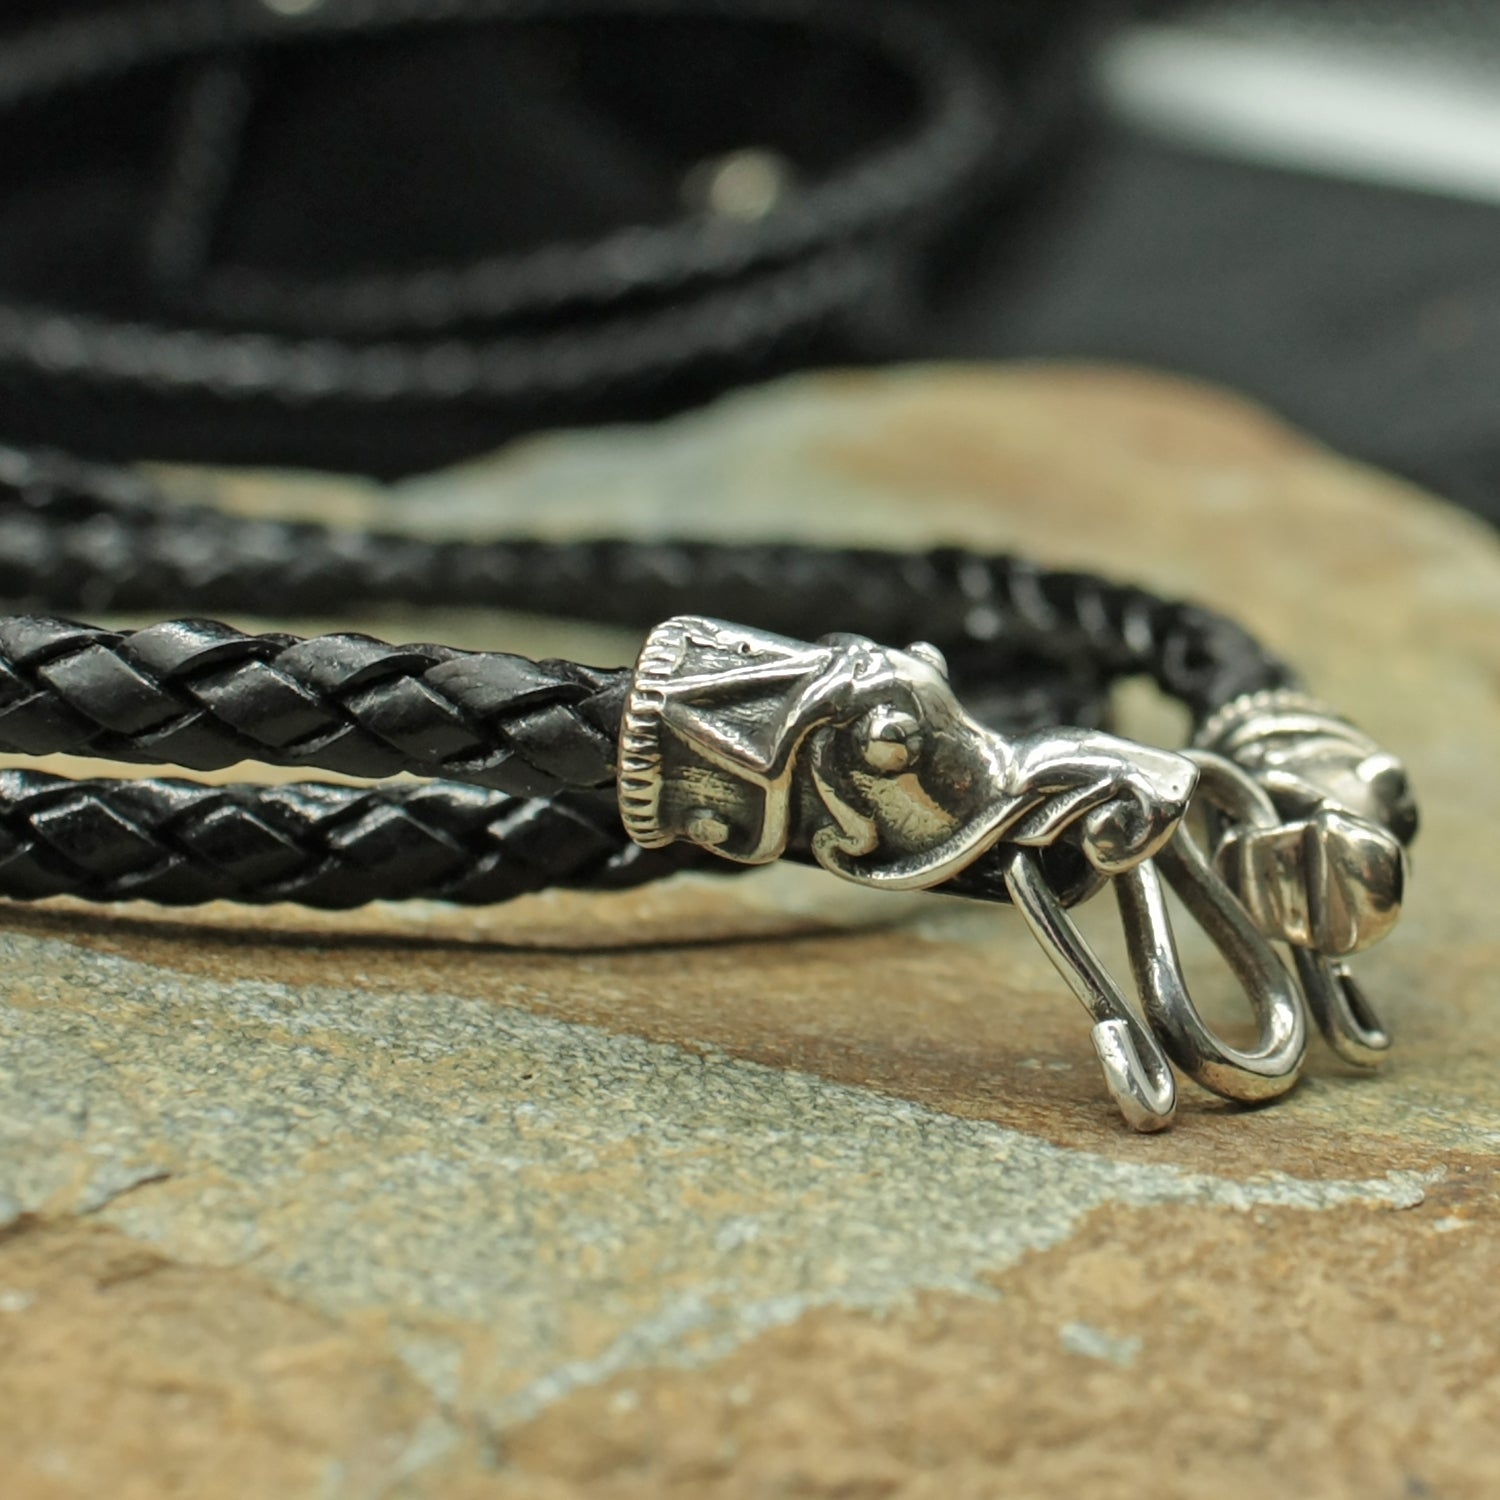 Braided Leather Viking Necklaces - Viking Jewelry Accessories